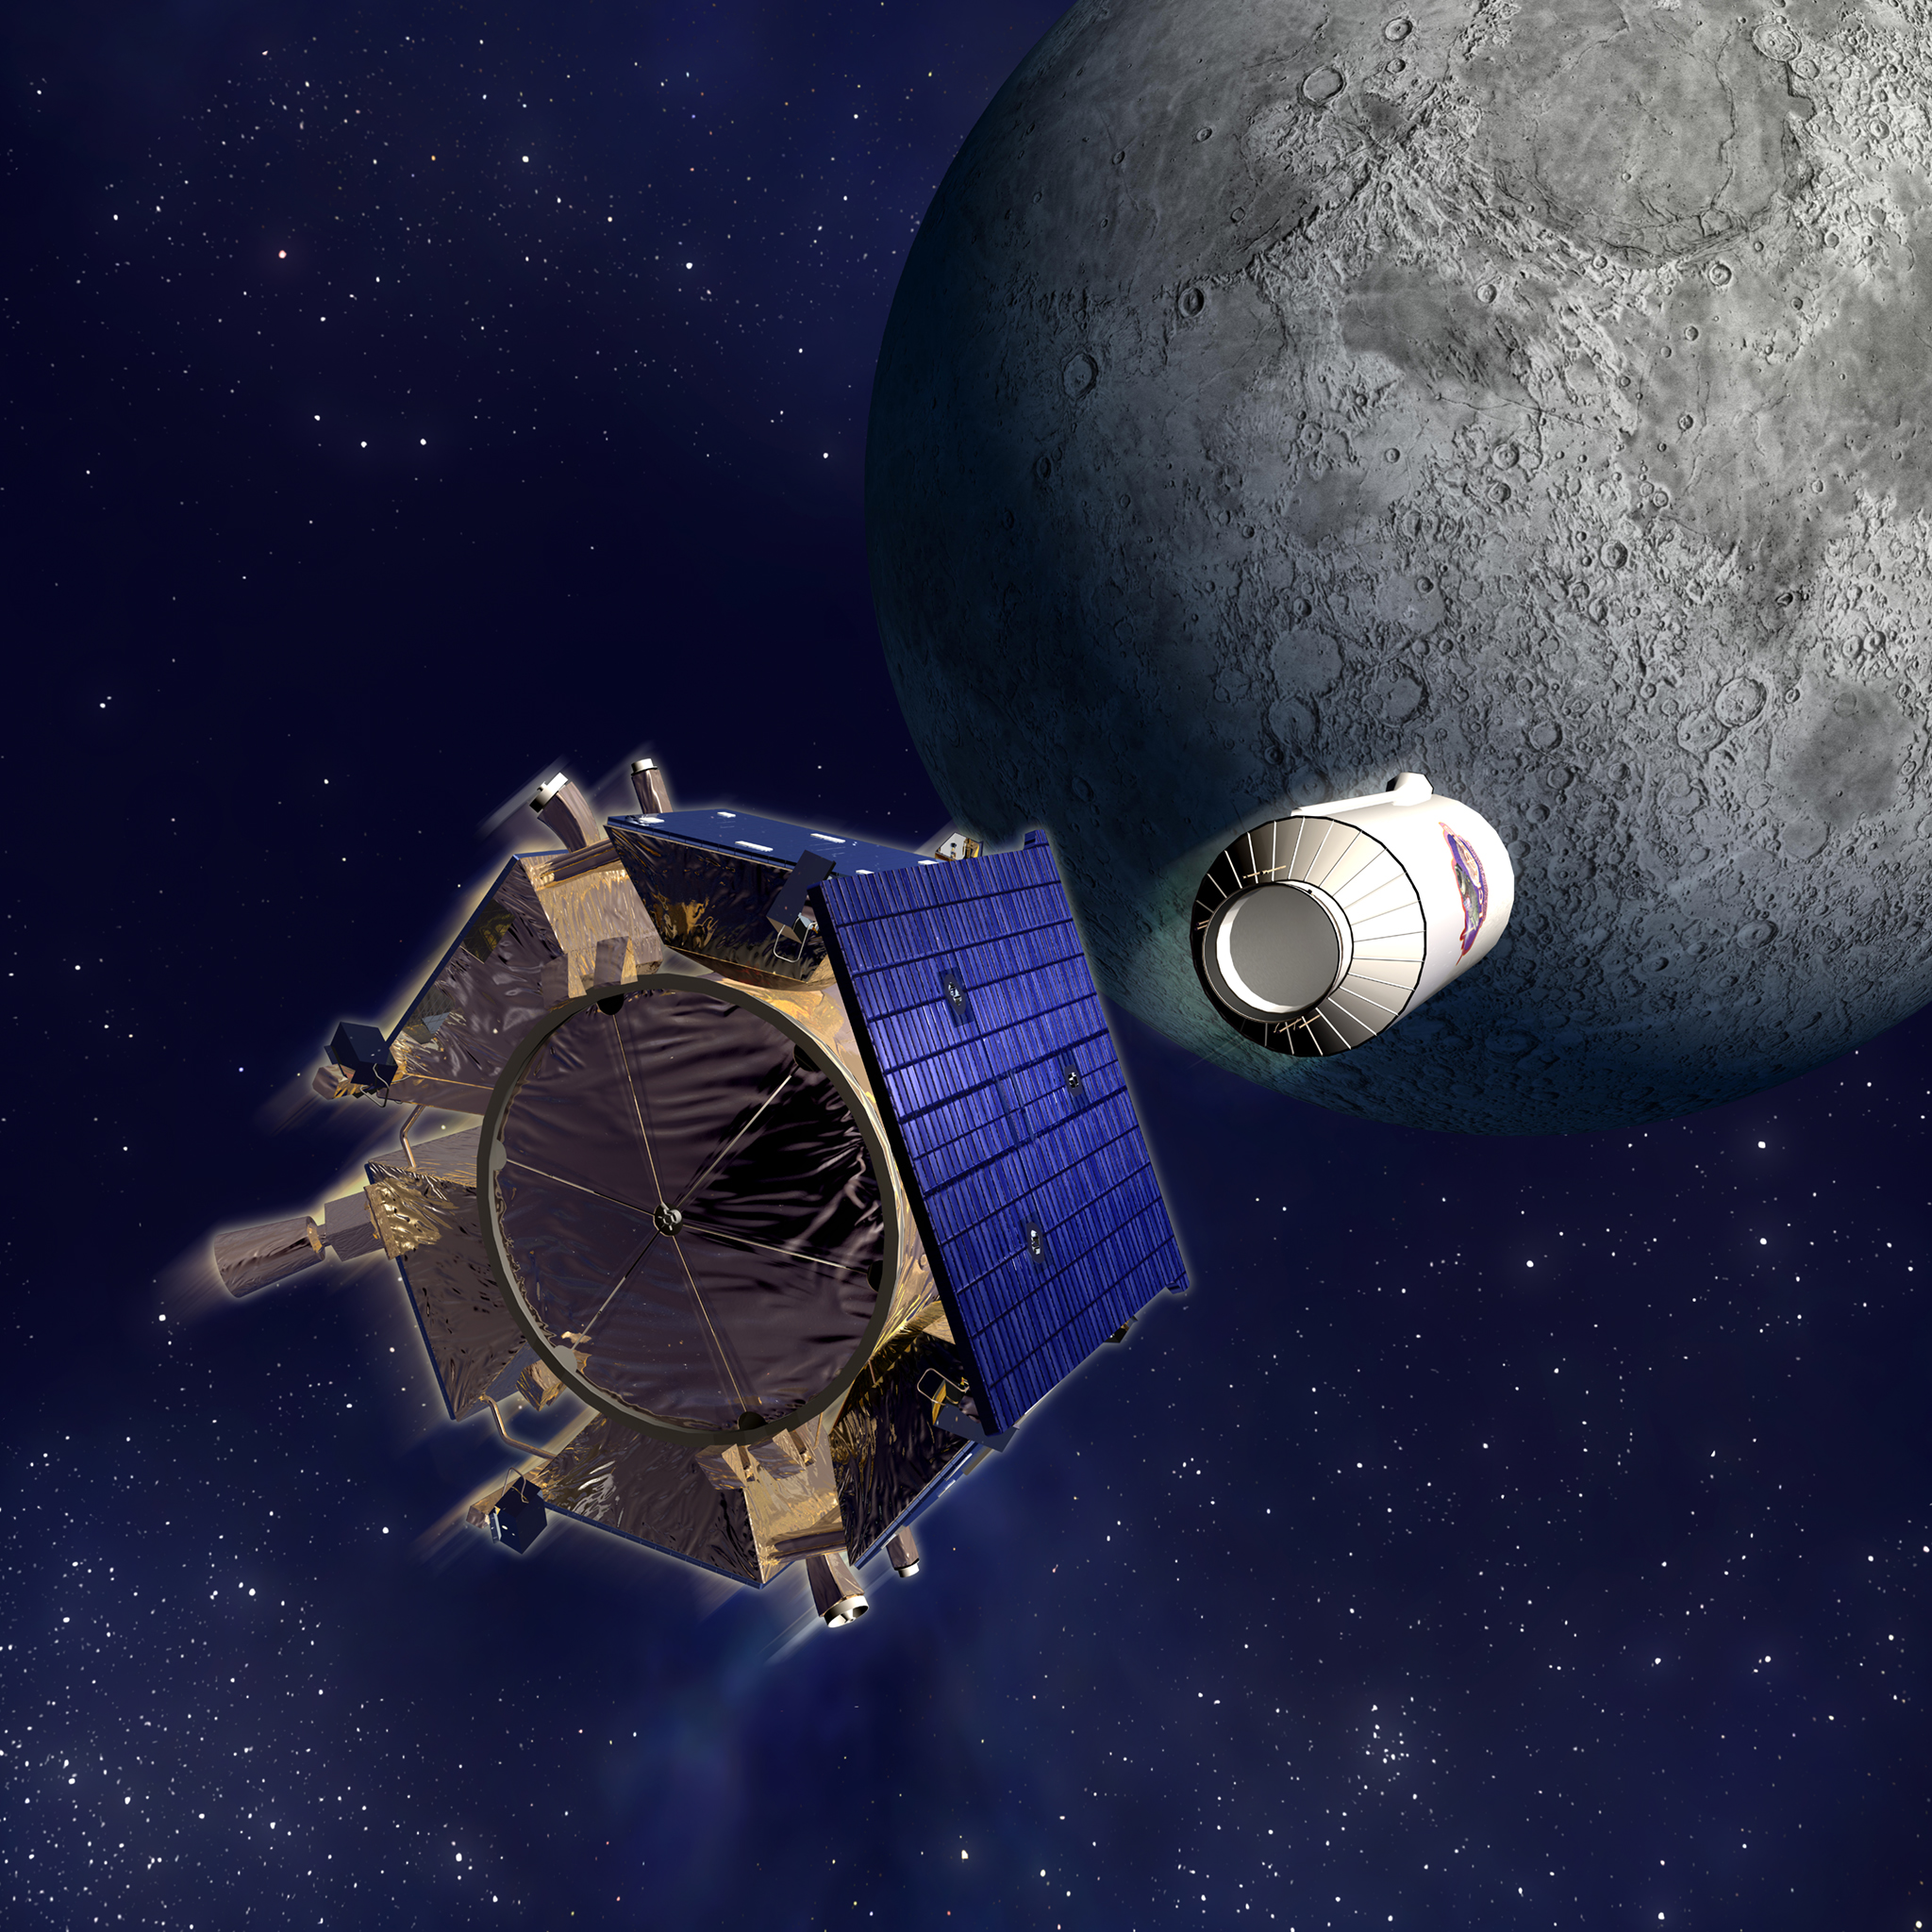 Illustration of the Lunar Crater Observation and Sensing Satellite's Shepherding Satellite at left and Centaur upper stage at right prior to lunar impact